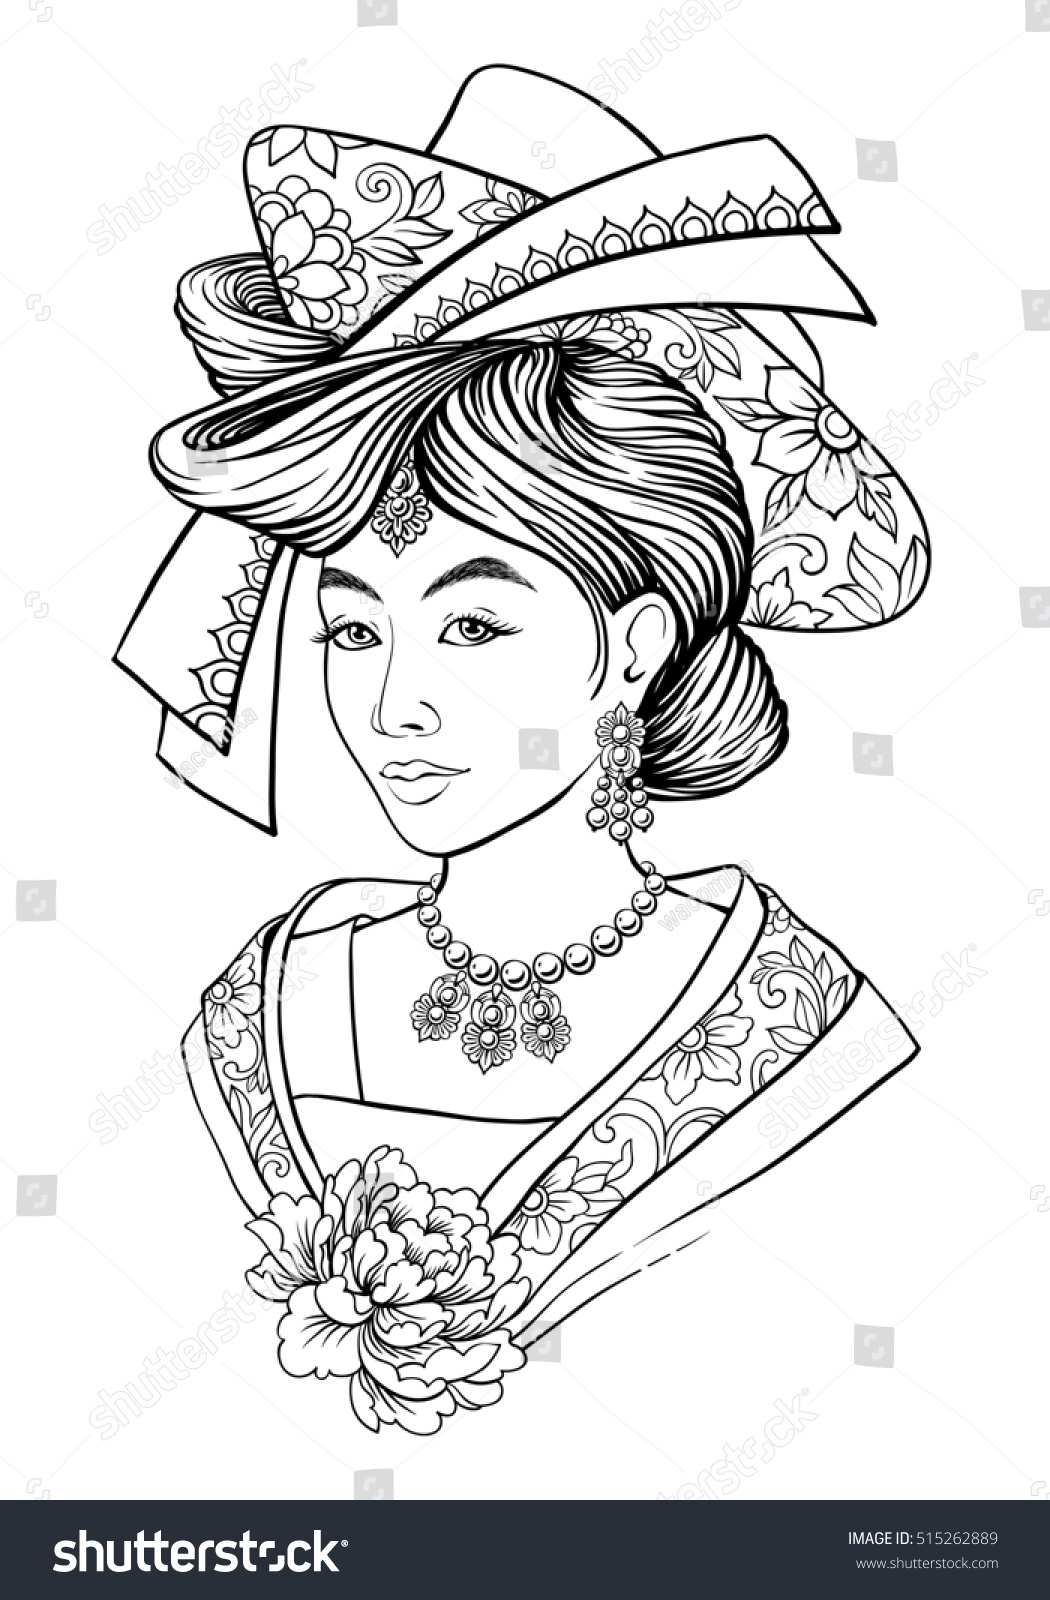 Download Vector Fashion Illustration Oriental Woman Ethnic Stock Vector Royalty Free 515262889